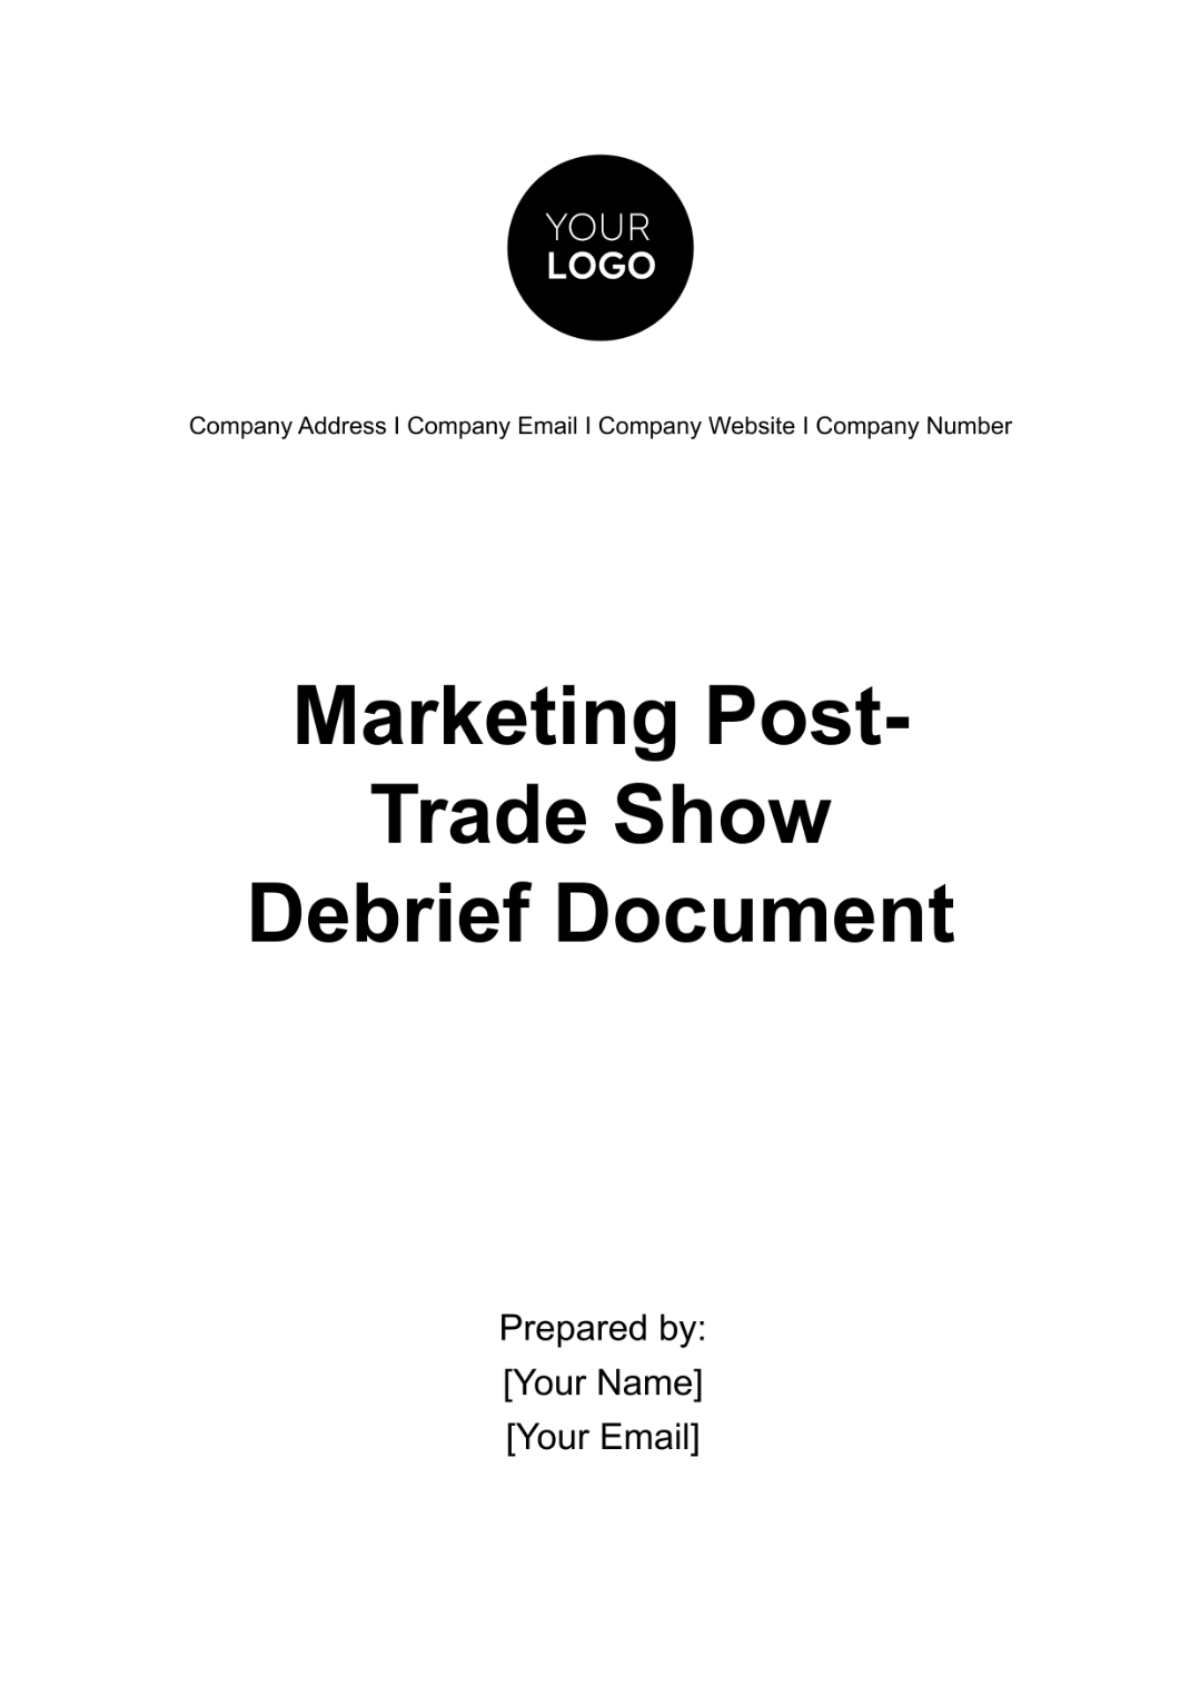 Free Marketing Post-Trade Show Debrief Document Template